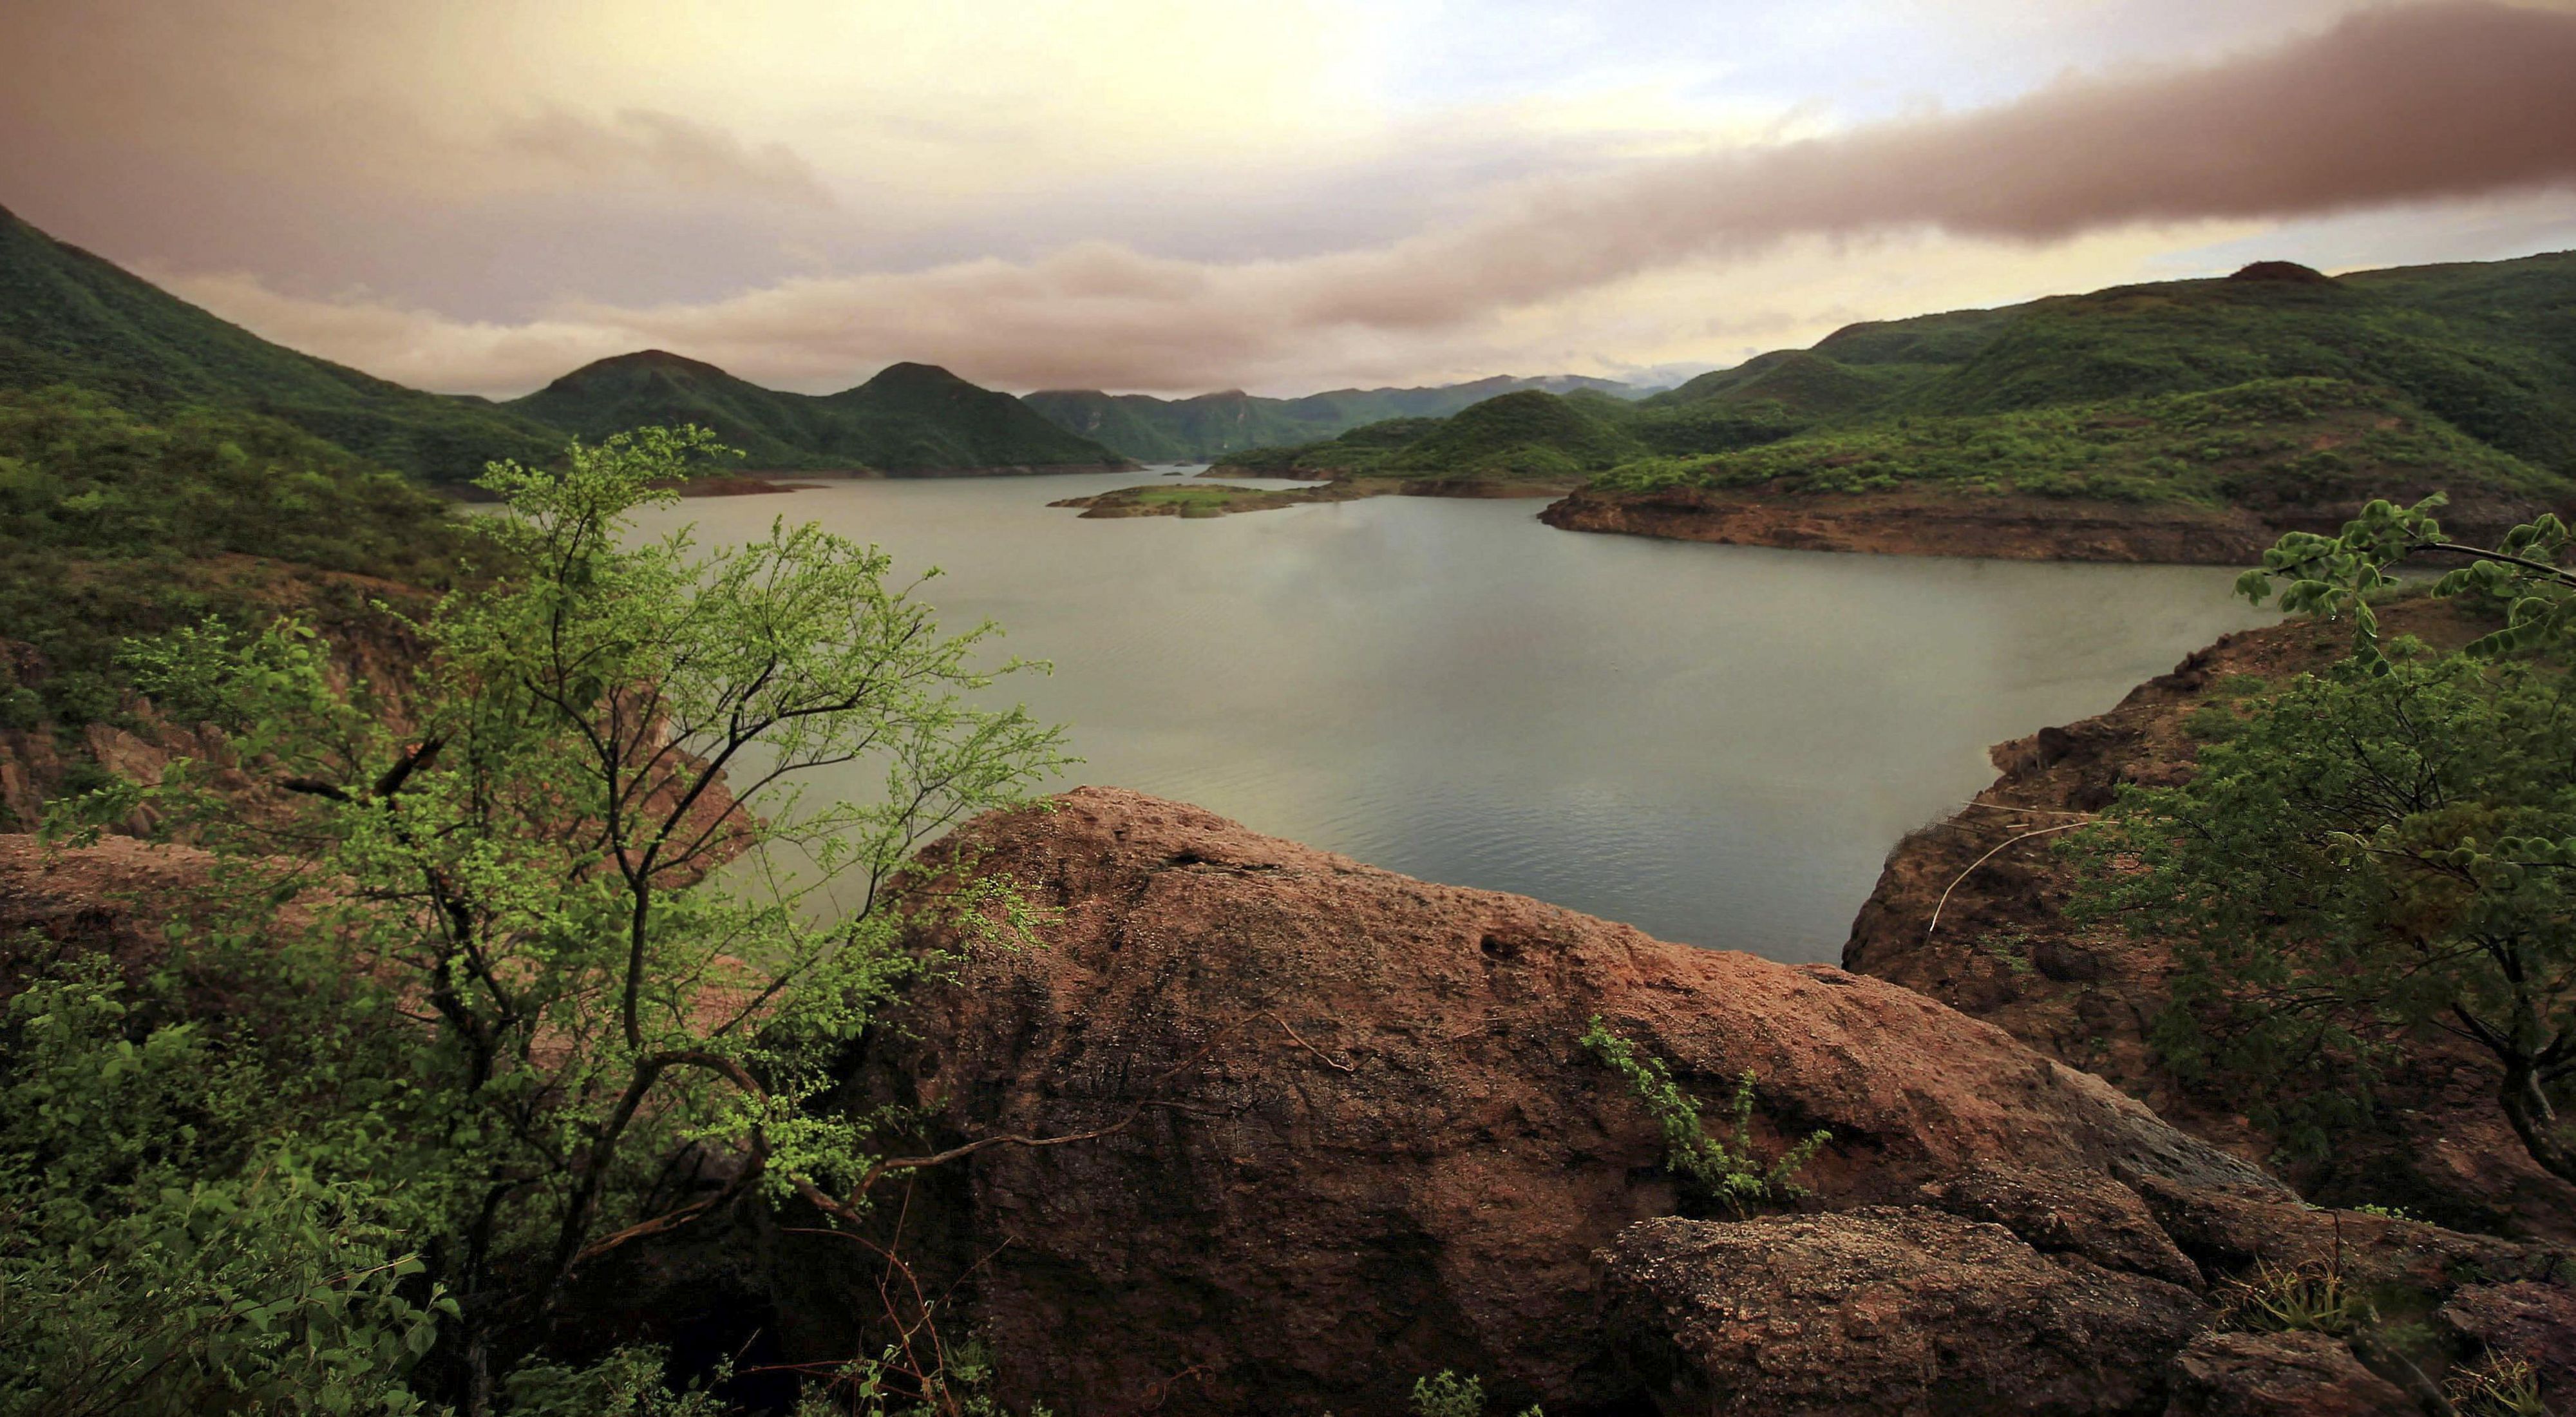 A lake in the mountains of Jalisco, Mexico at sunset